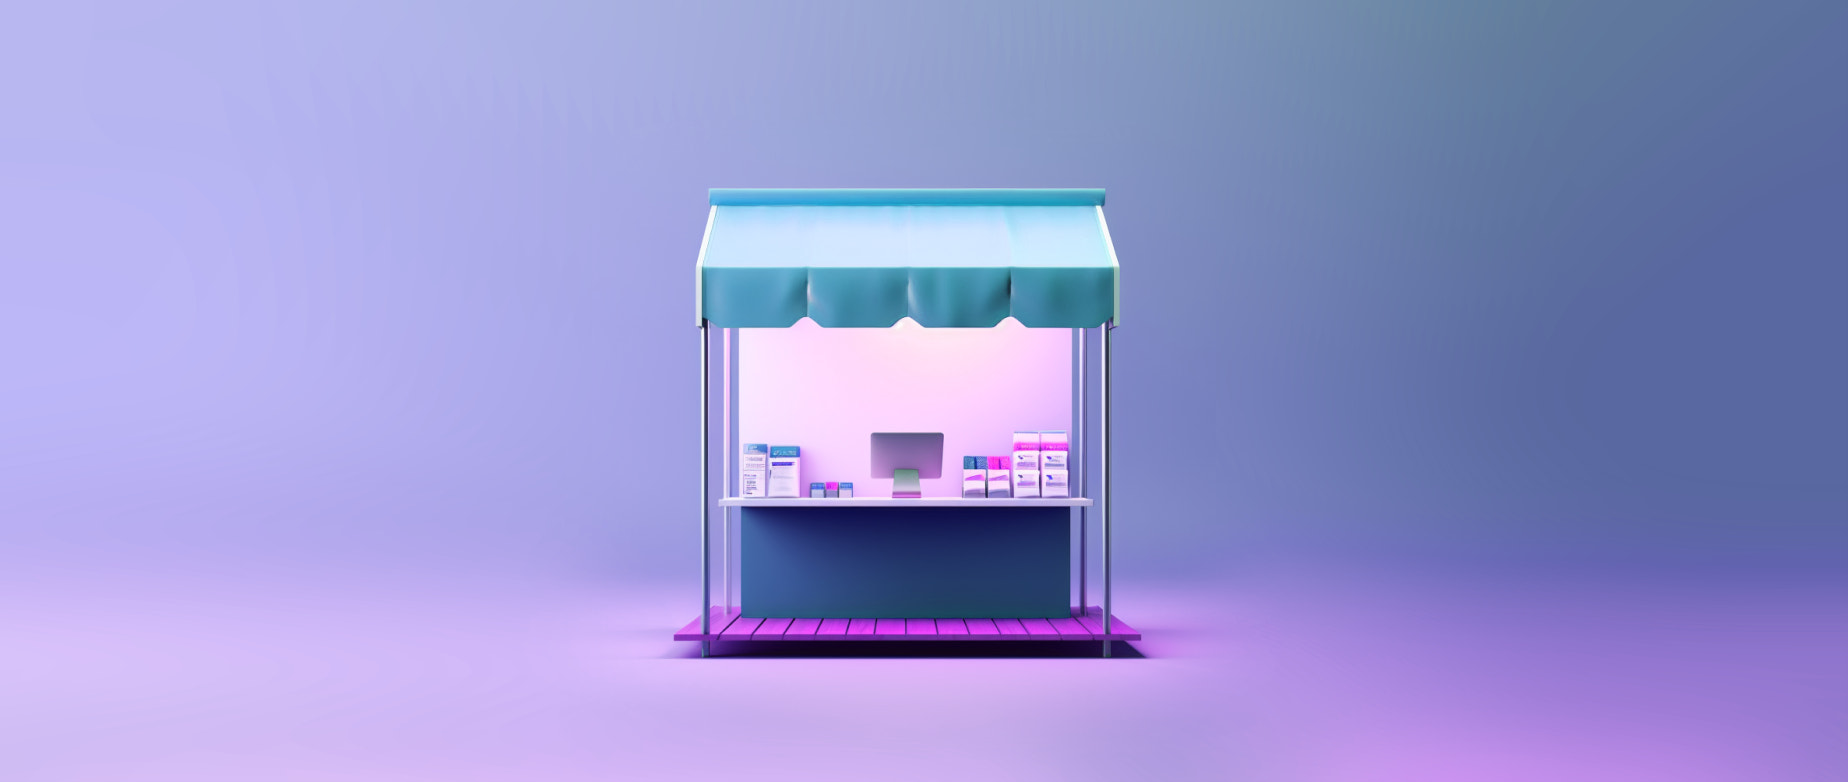 Make Your Pop-up Shop Successful + 7 Creative Examples